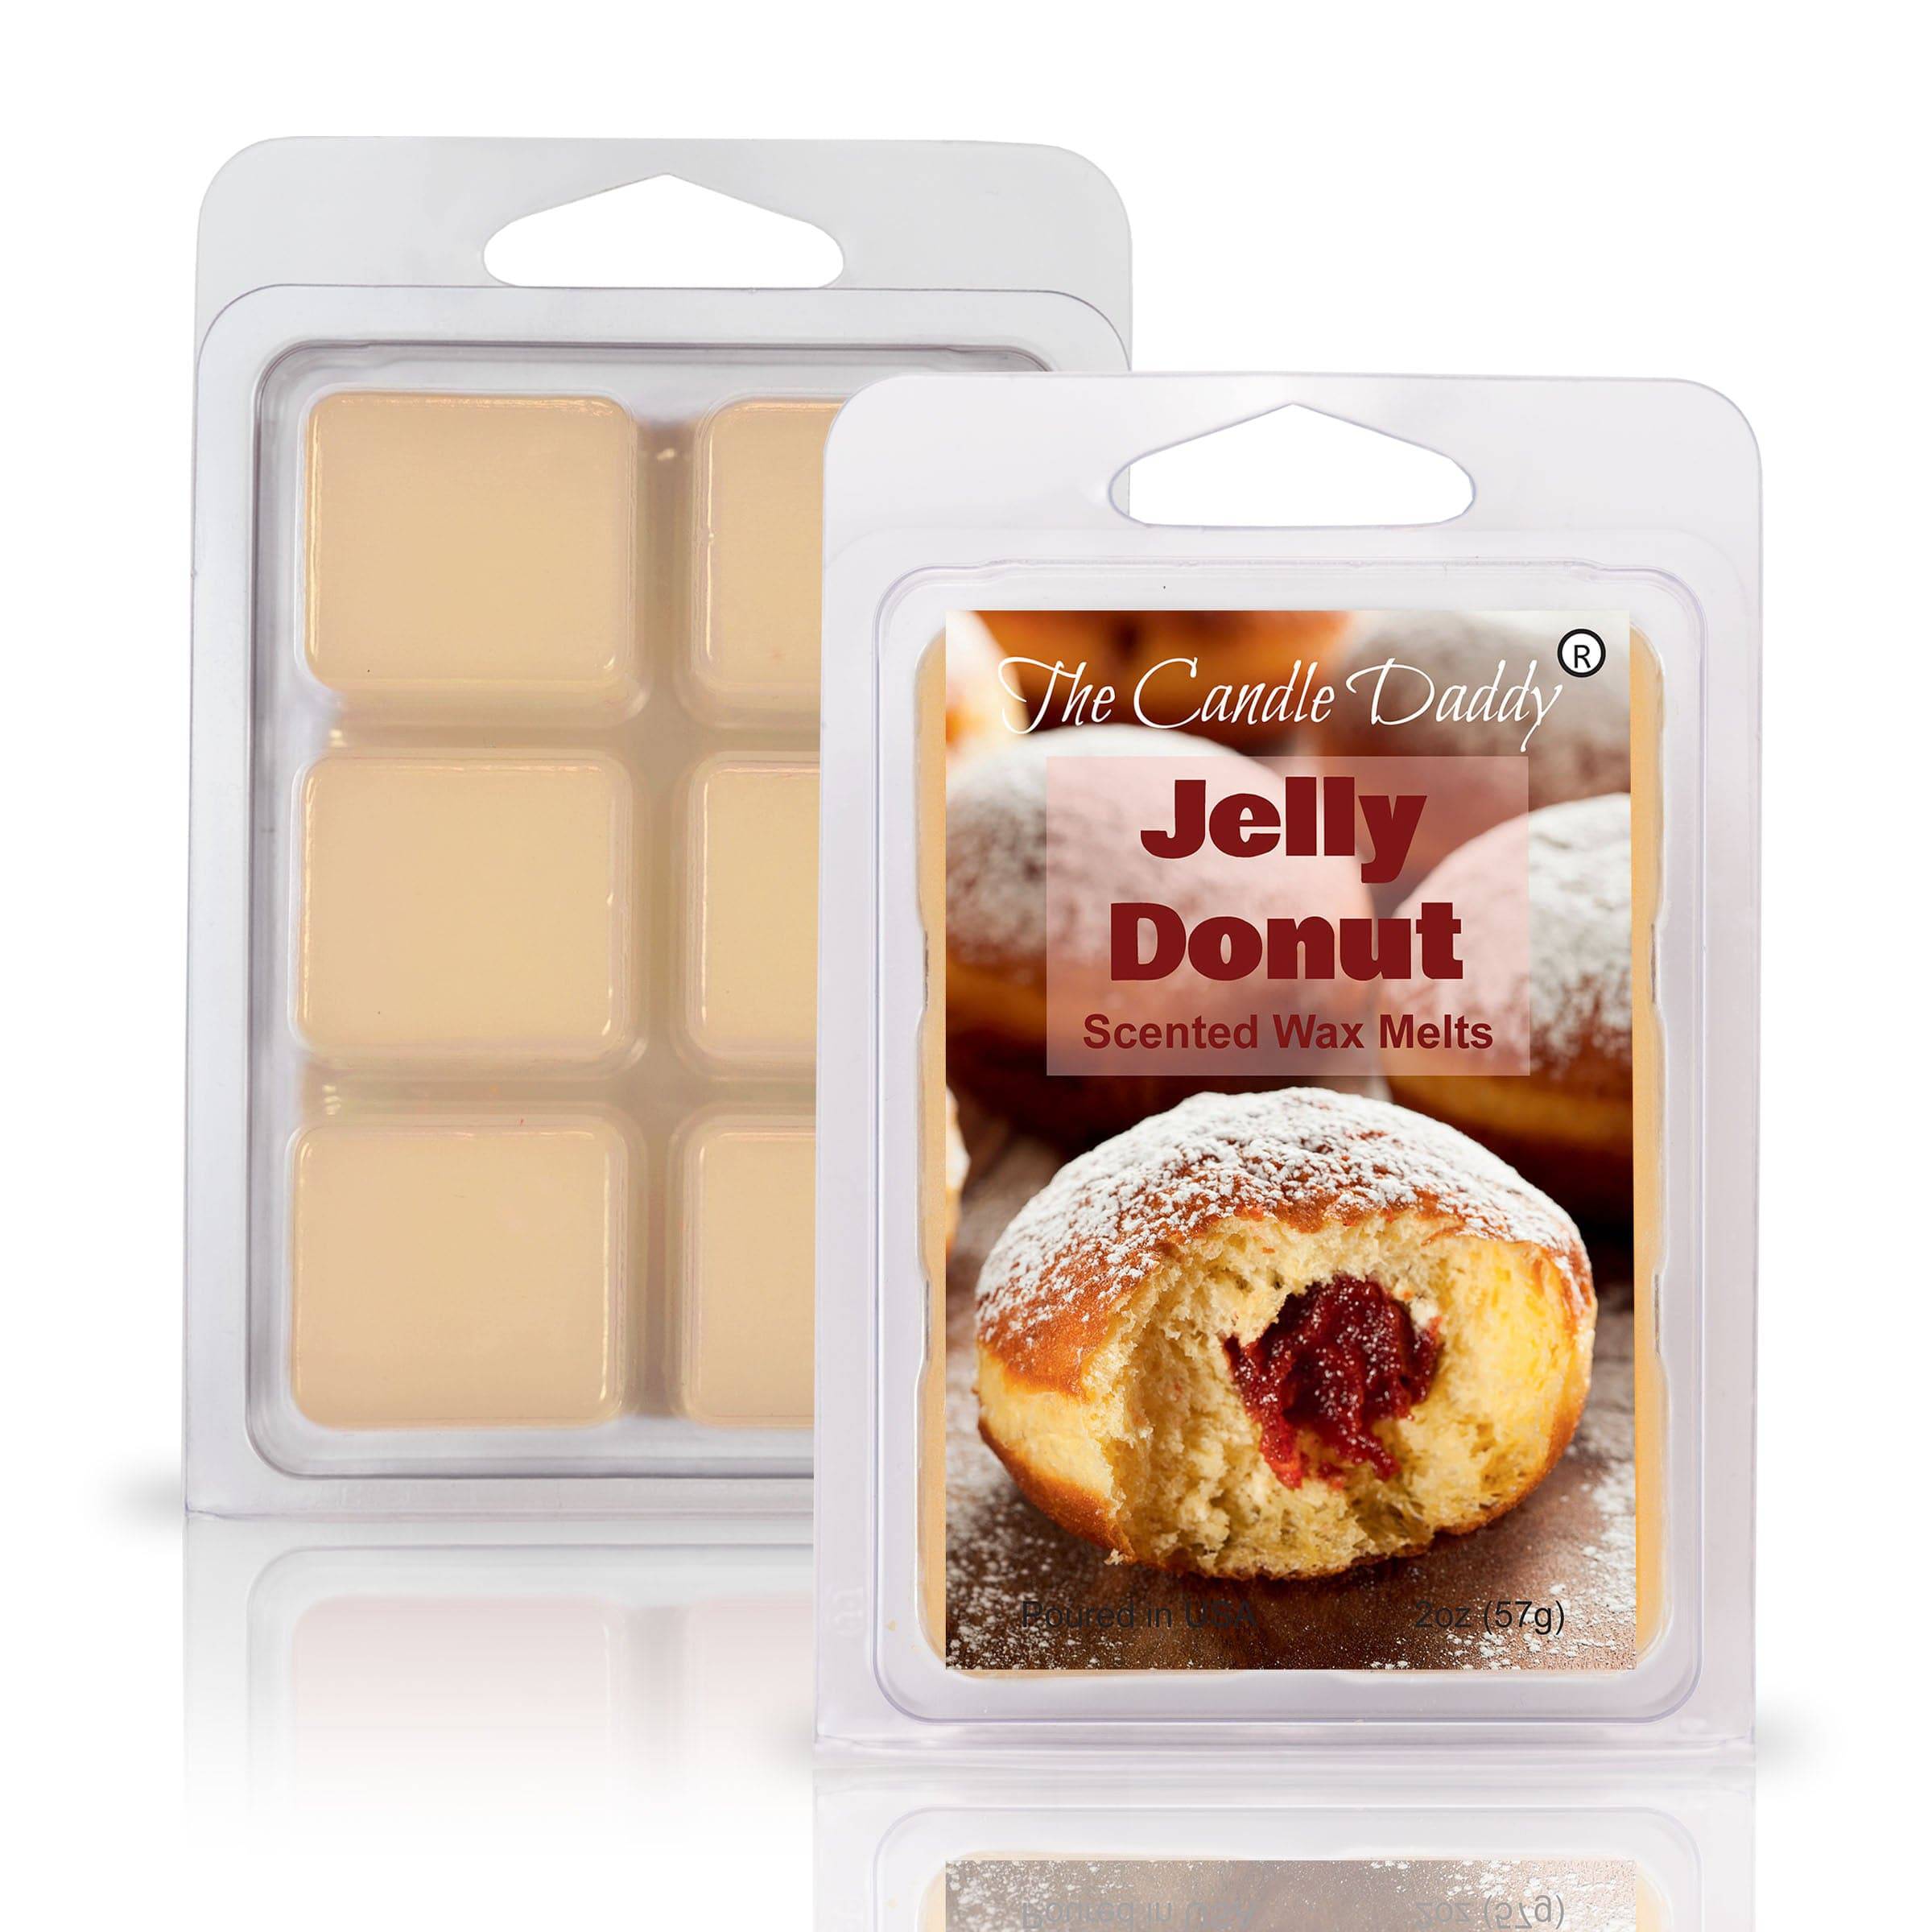 Jelly Donut - Sweet Pastry and Fruit Scented Wax Melt - 1 Pack - 2 Ounces -  6 Cubes